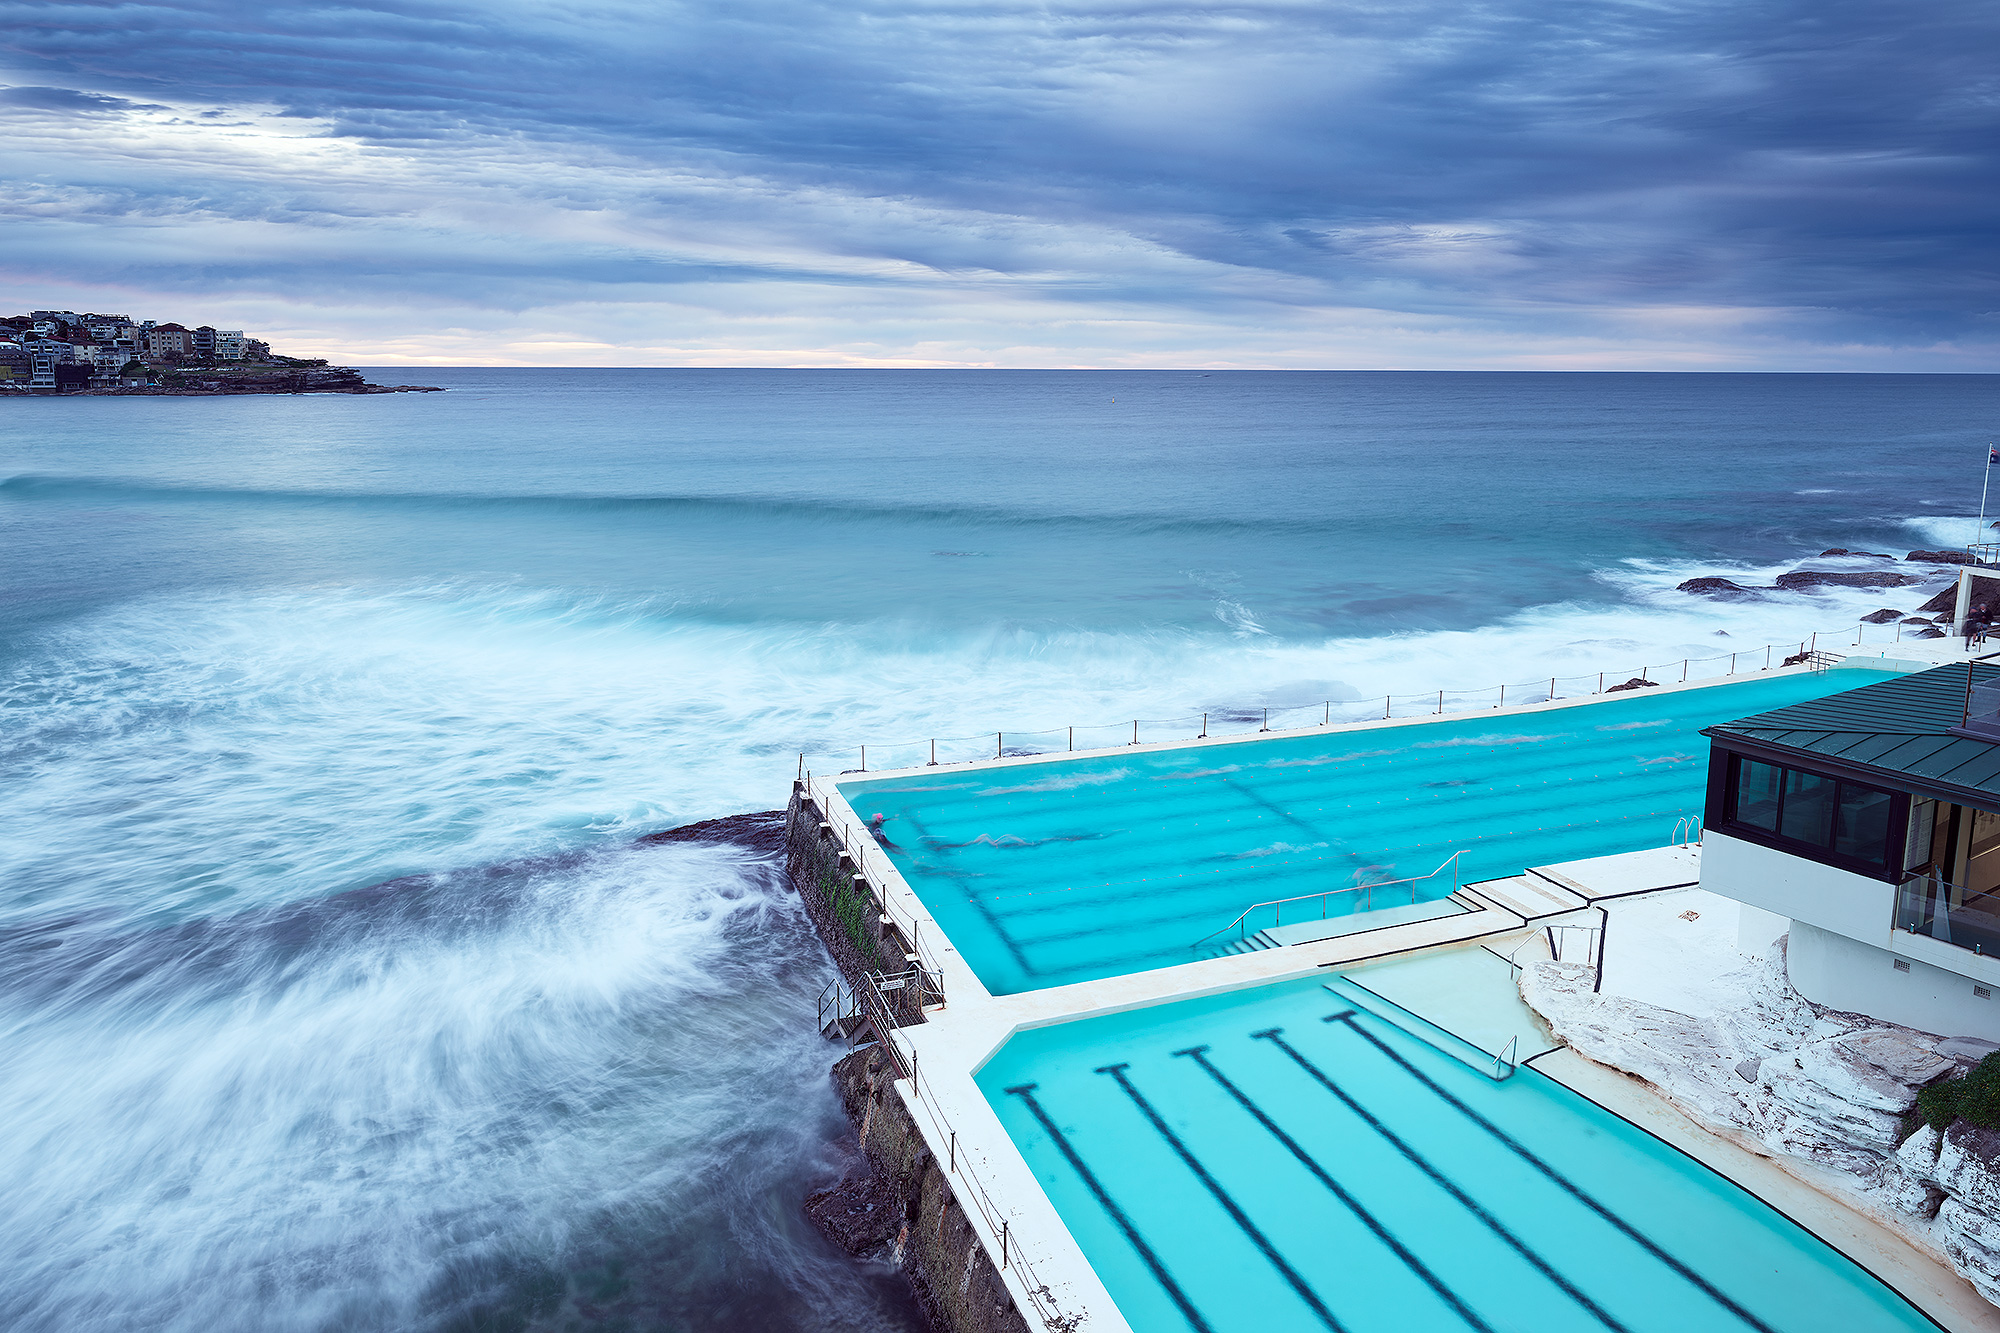 Icebergs, this morning with a clean pool